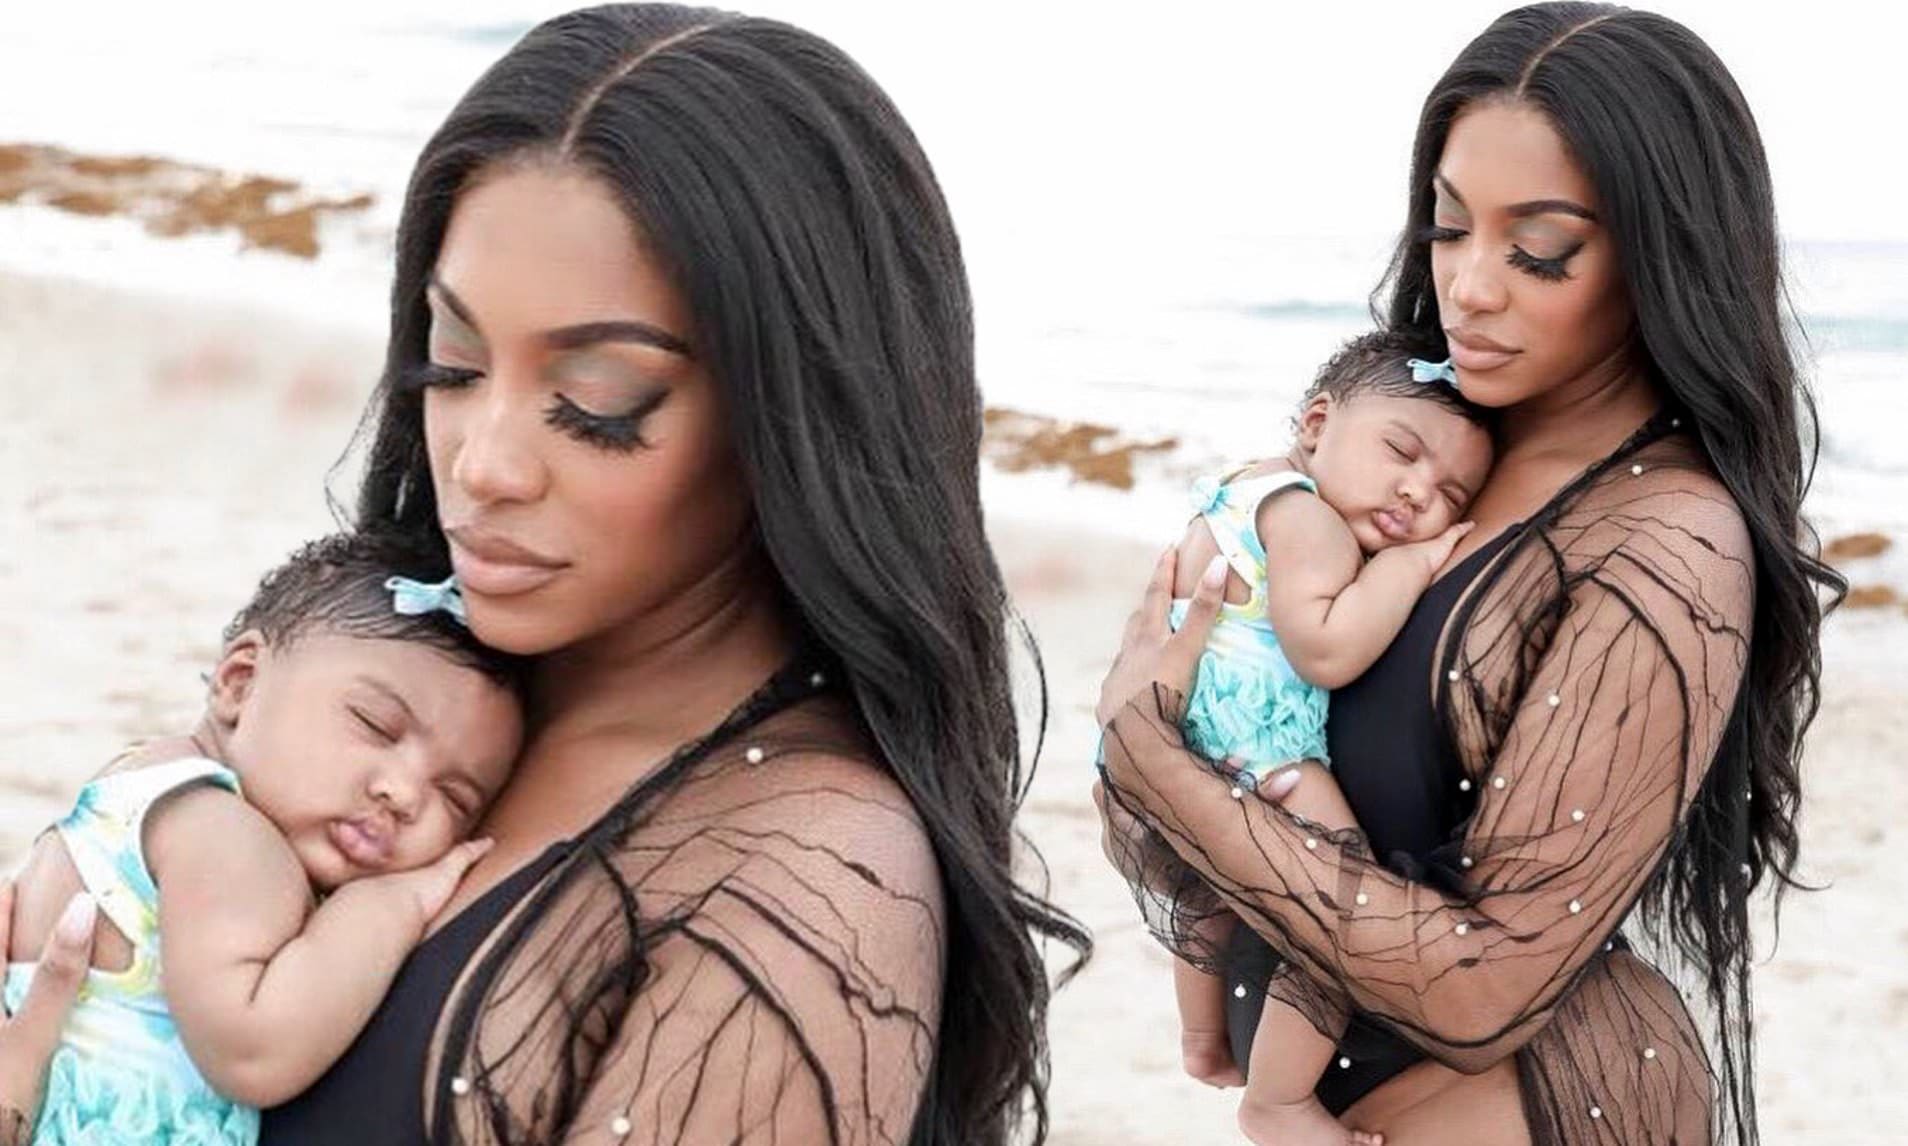 Porsha Williams Strikes A Pose With Her Bestie - Fans Finally Get To See Baby PJ Smiling